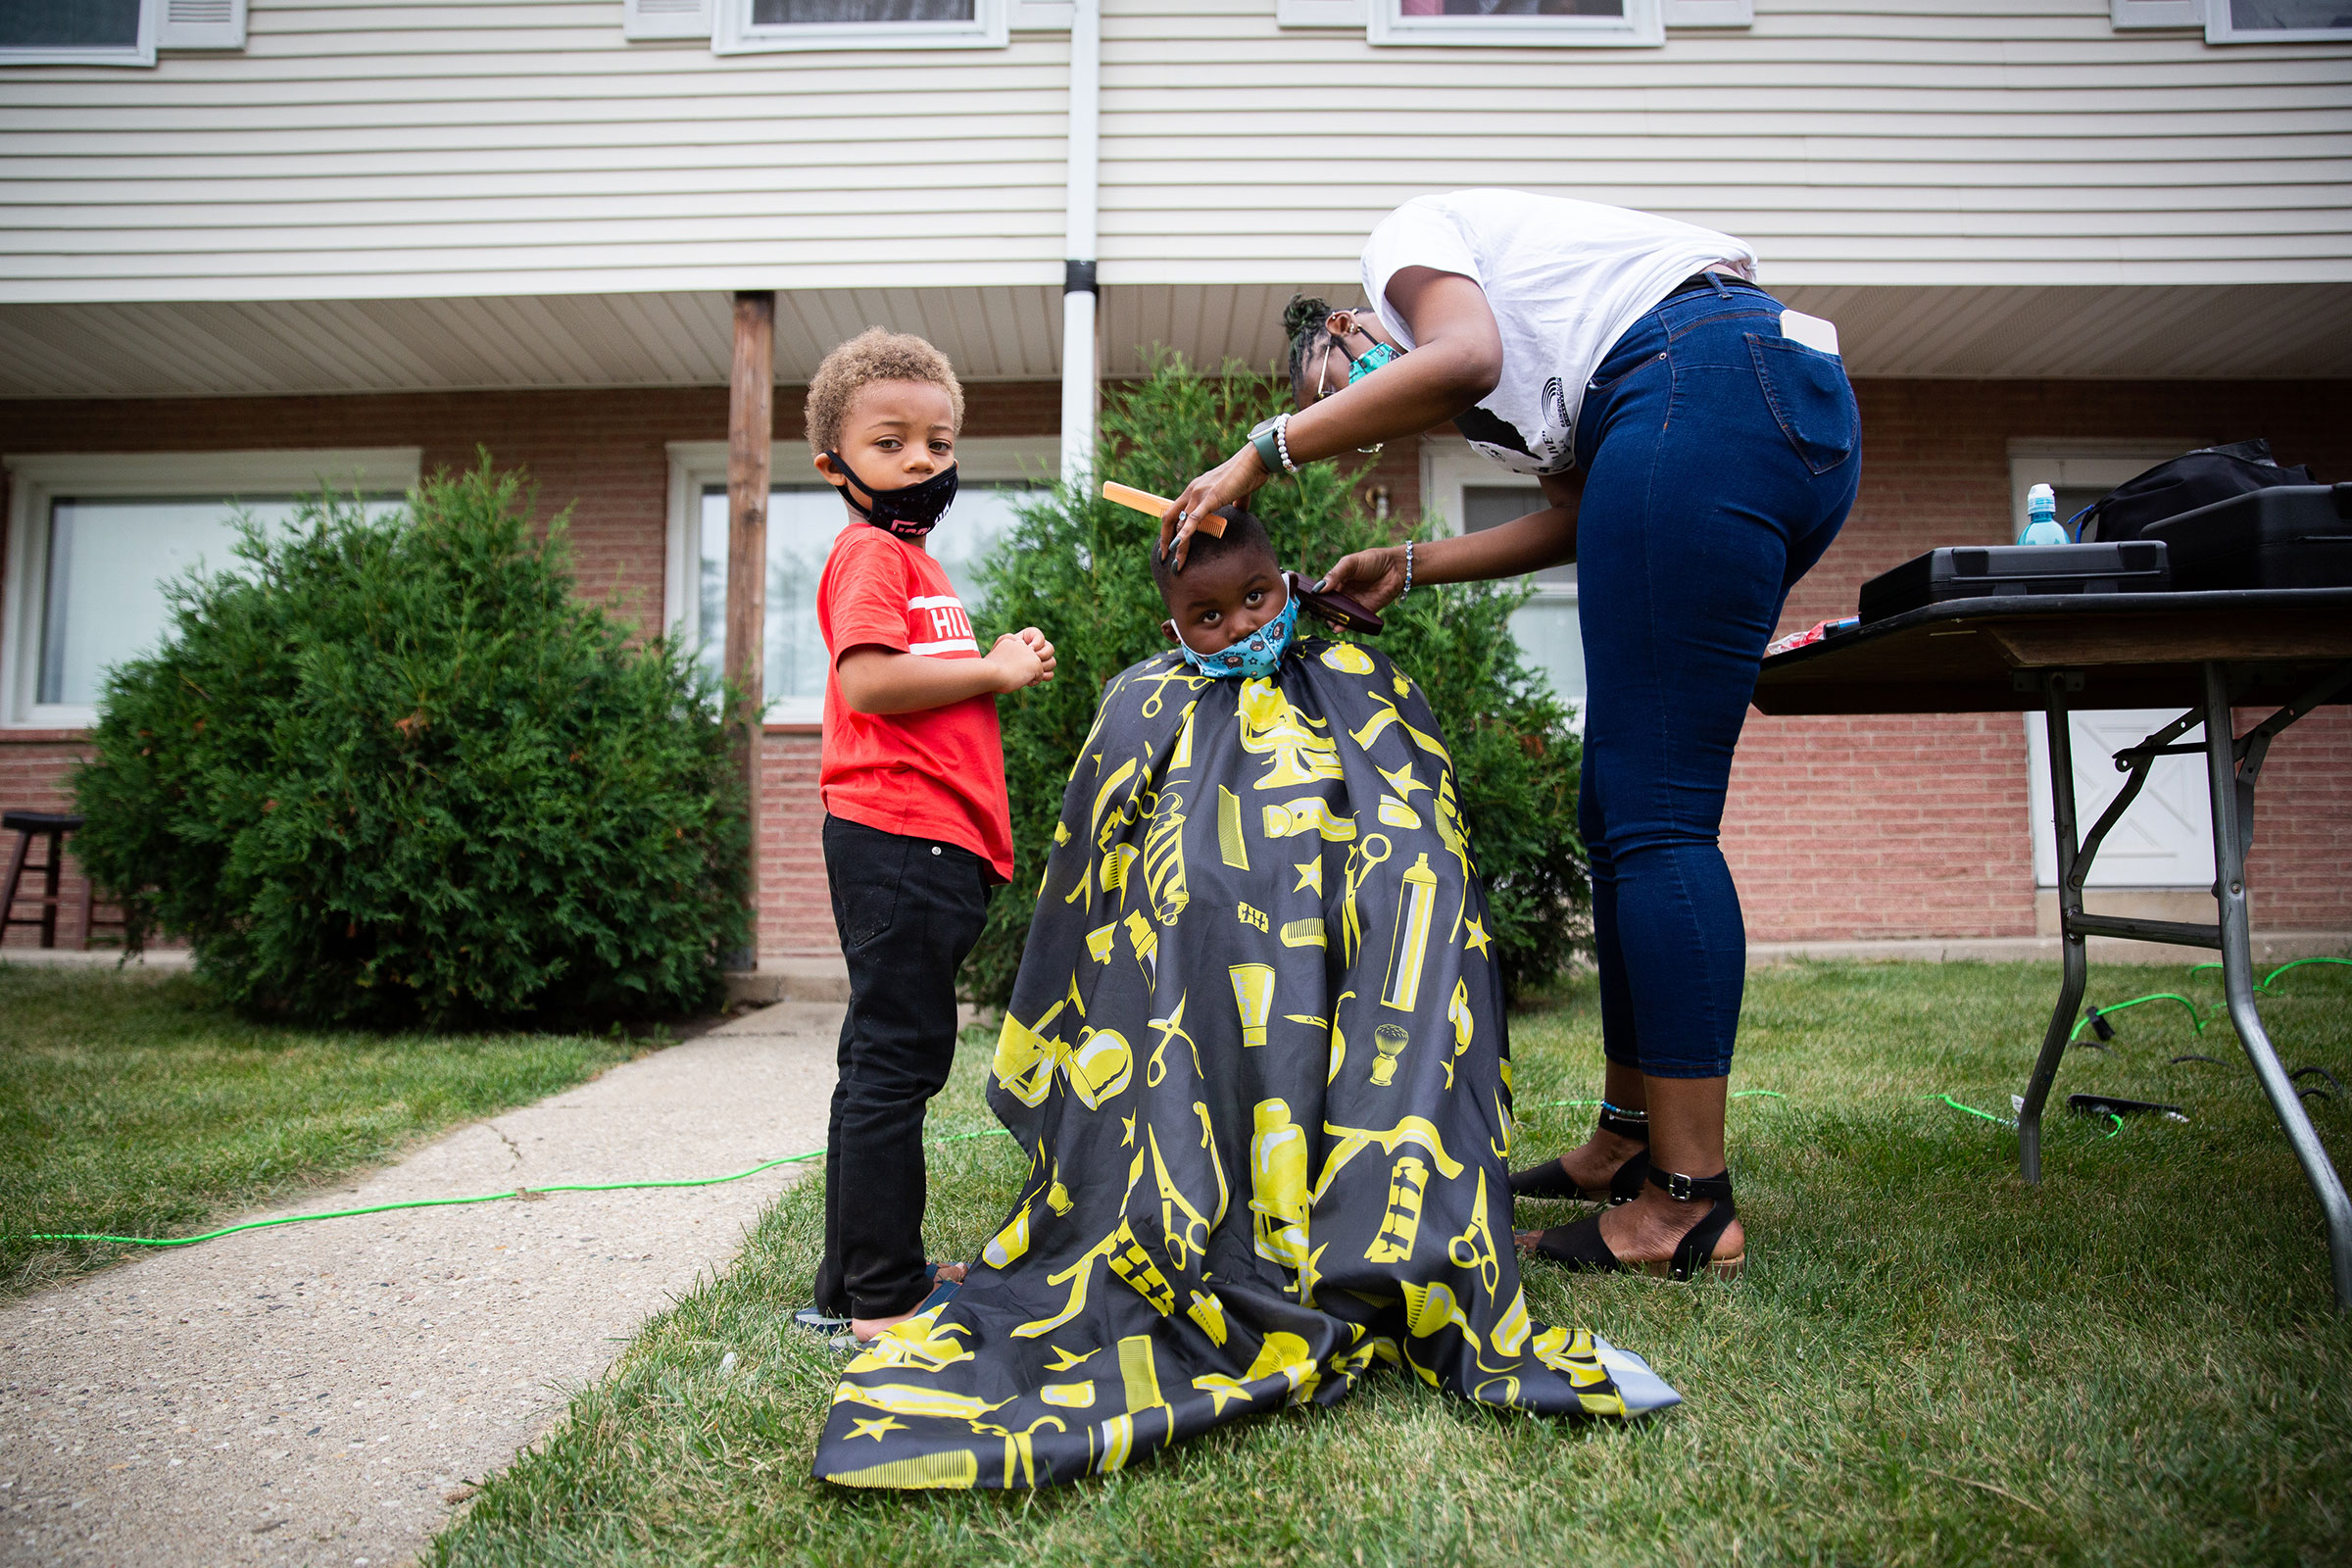 A young boy gets his haircut at the community gathering hosted by Jacob Blake’s family in Kenosha, Wis., on Sept. 1, 2020. (Patience Zalanga for TIME)